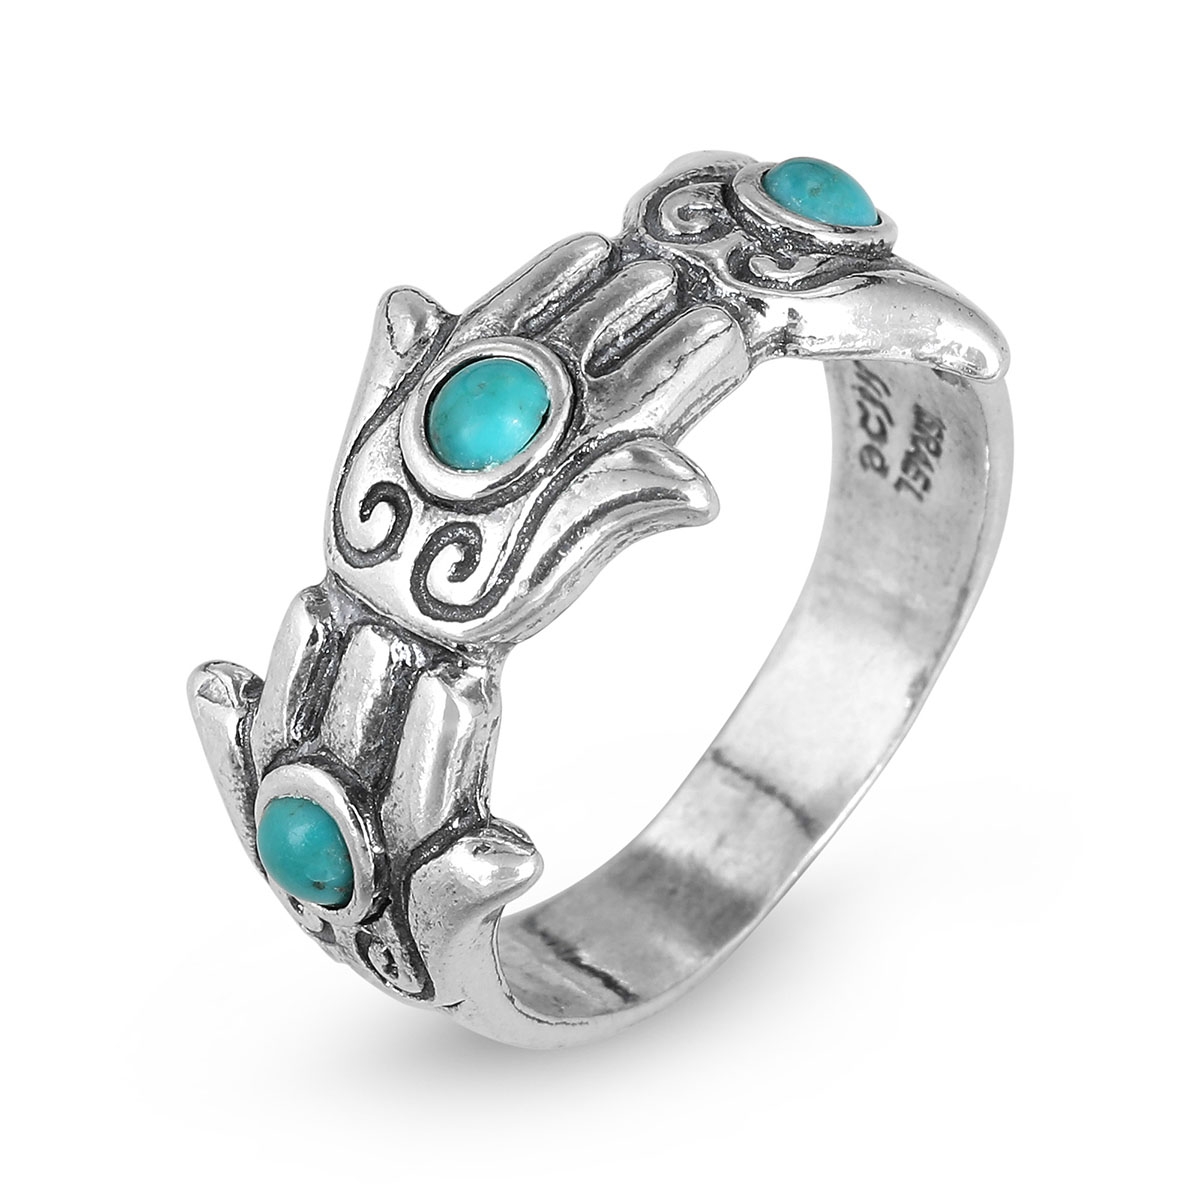 Designer Sterling Silver and Turquoise Stone Hamsa Ring - 1